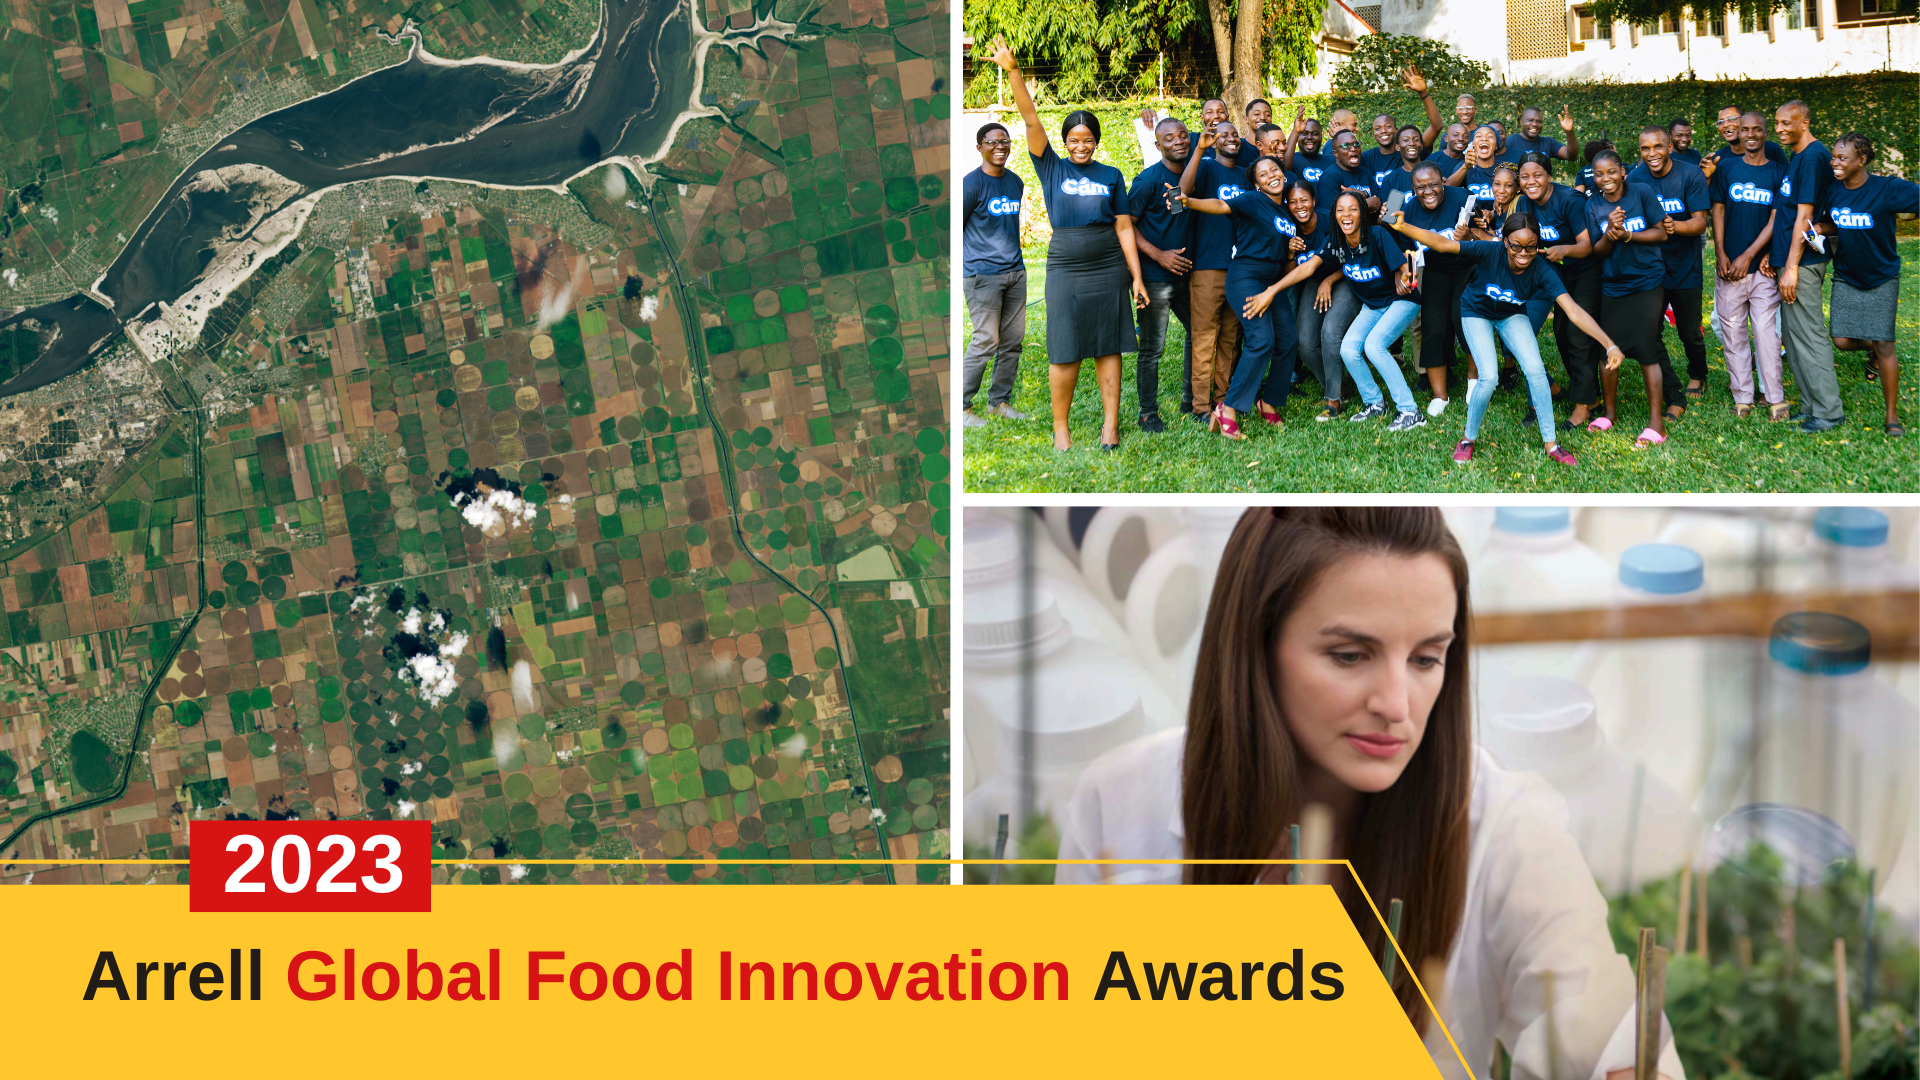 Winners of 2023 Arrell Global Food Innovation Awards Announced